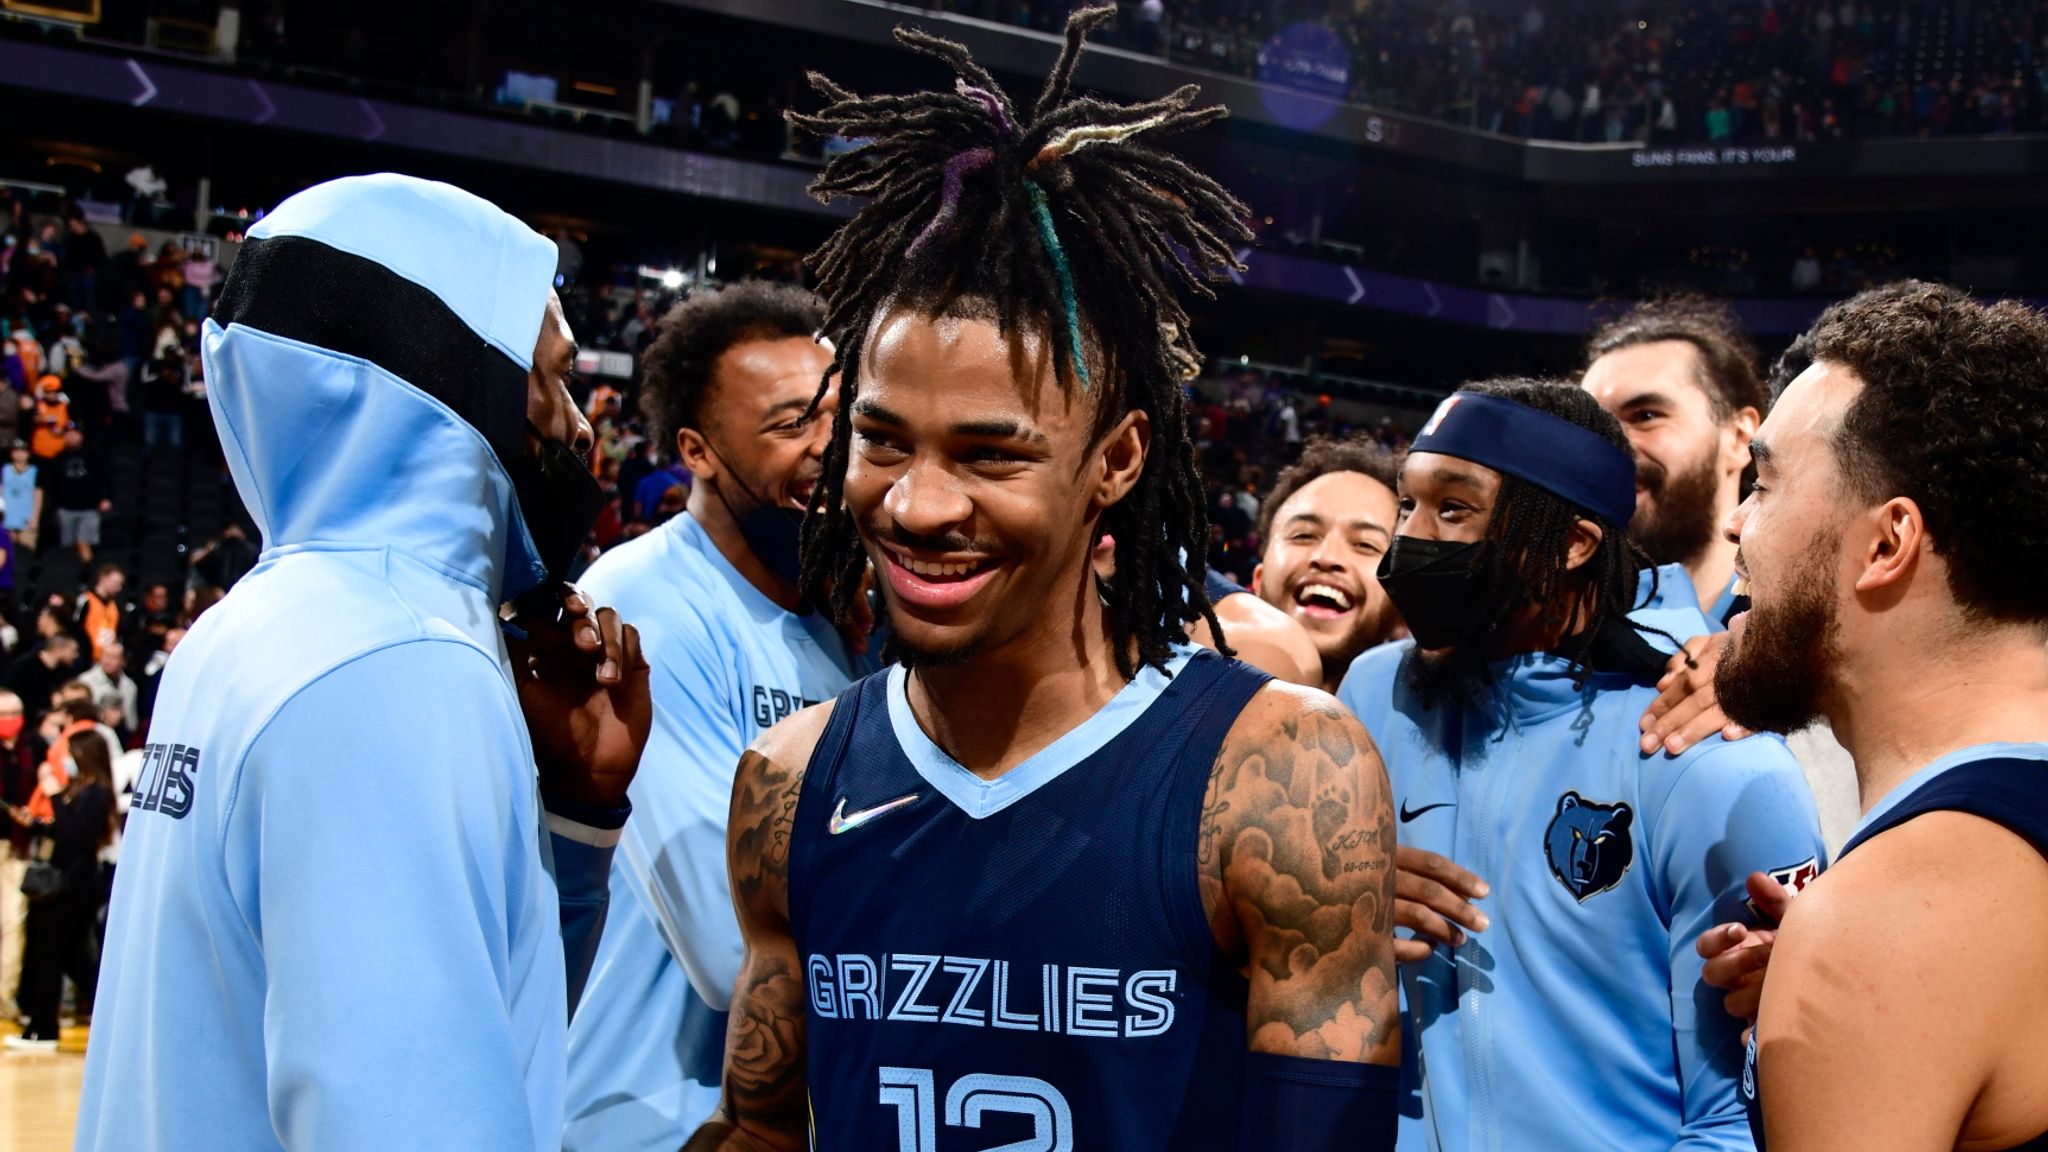 Grizzlies point guard Ja Morant named NBA Most Improved Player